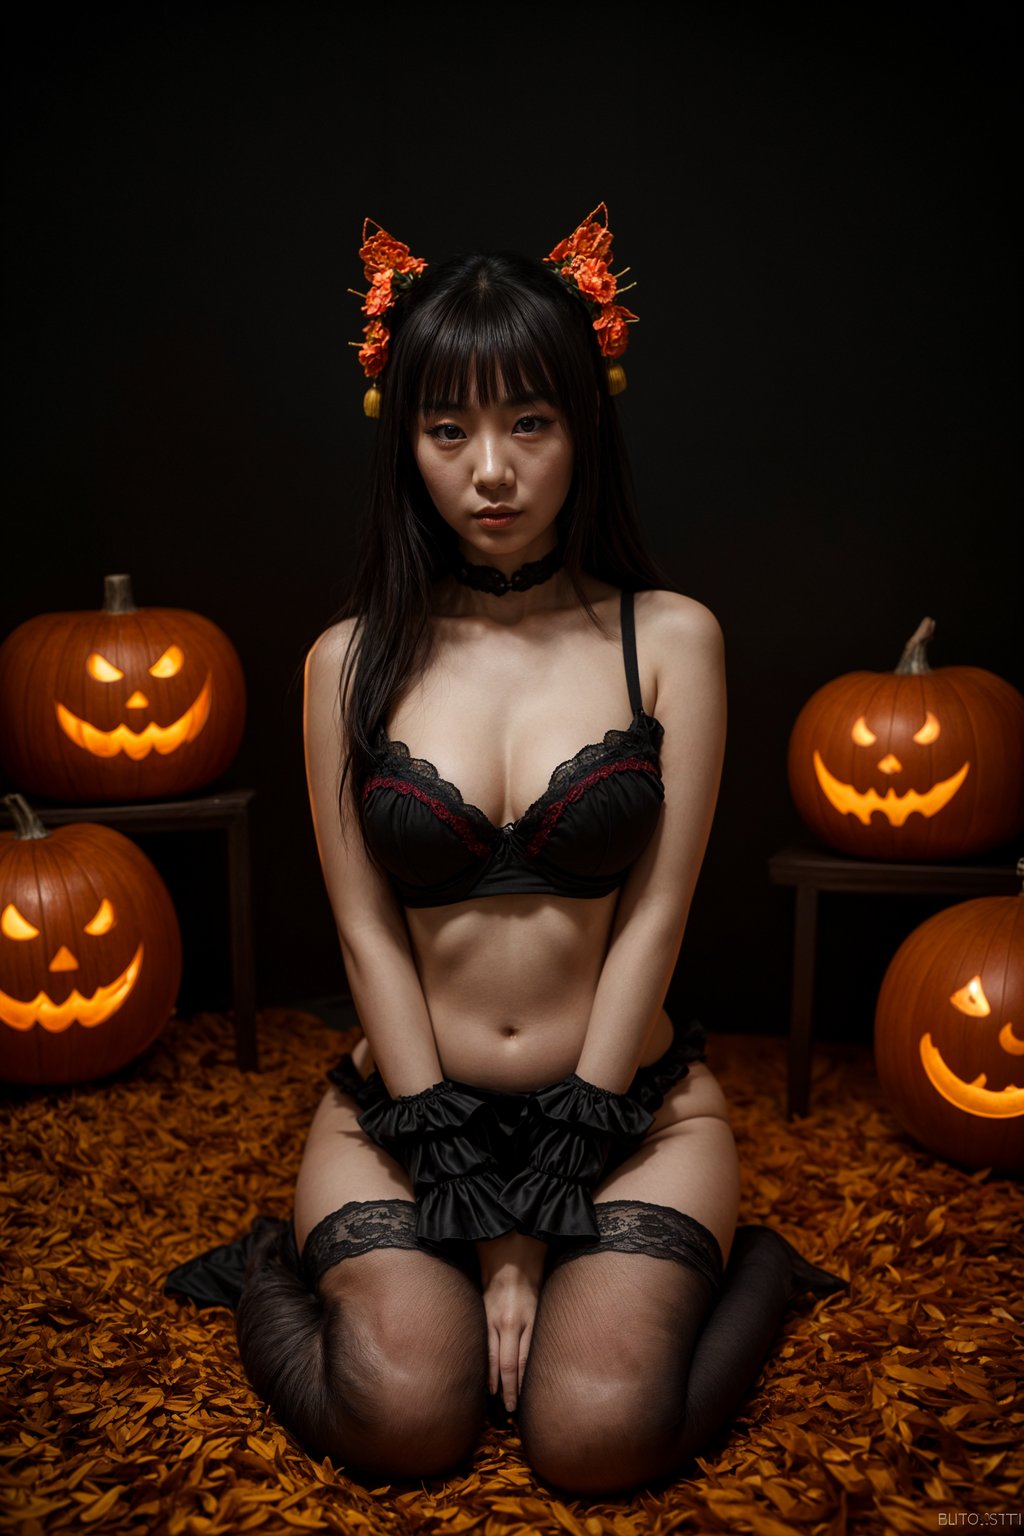 woman wearing (naughty halloween) (sexy halloween costume) (stockings) (halloween outfit), spooky outfit posing for photo, background is halloween pumpkins and spiderwebs